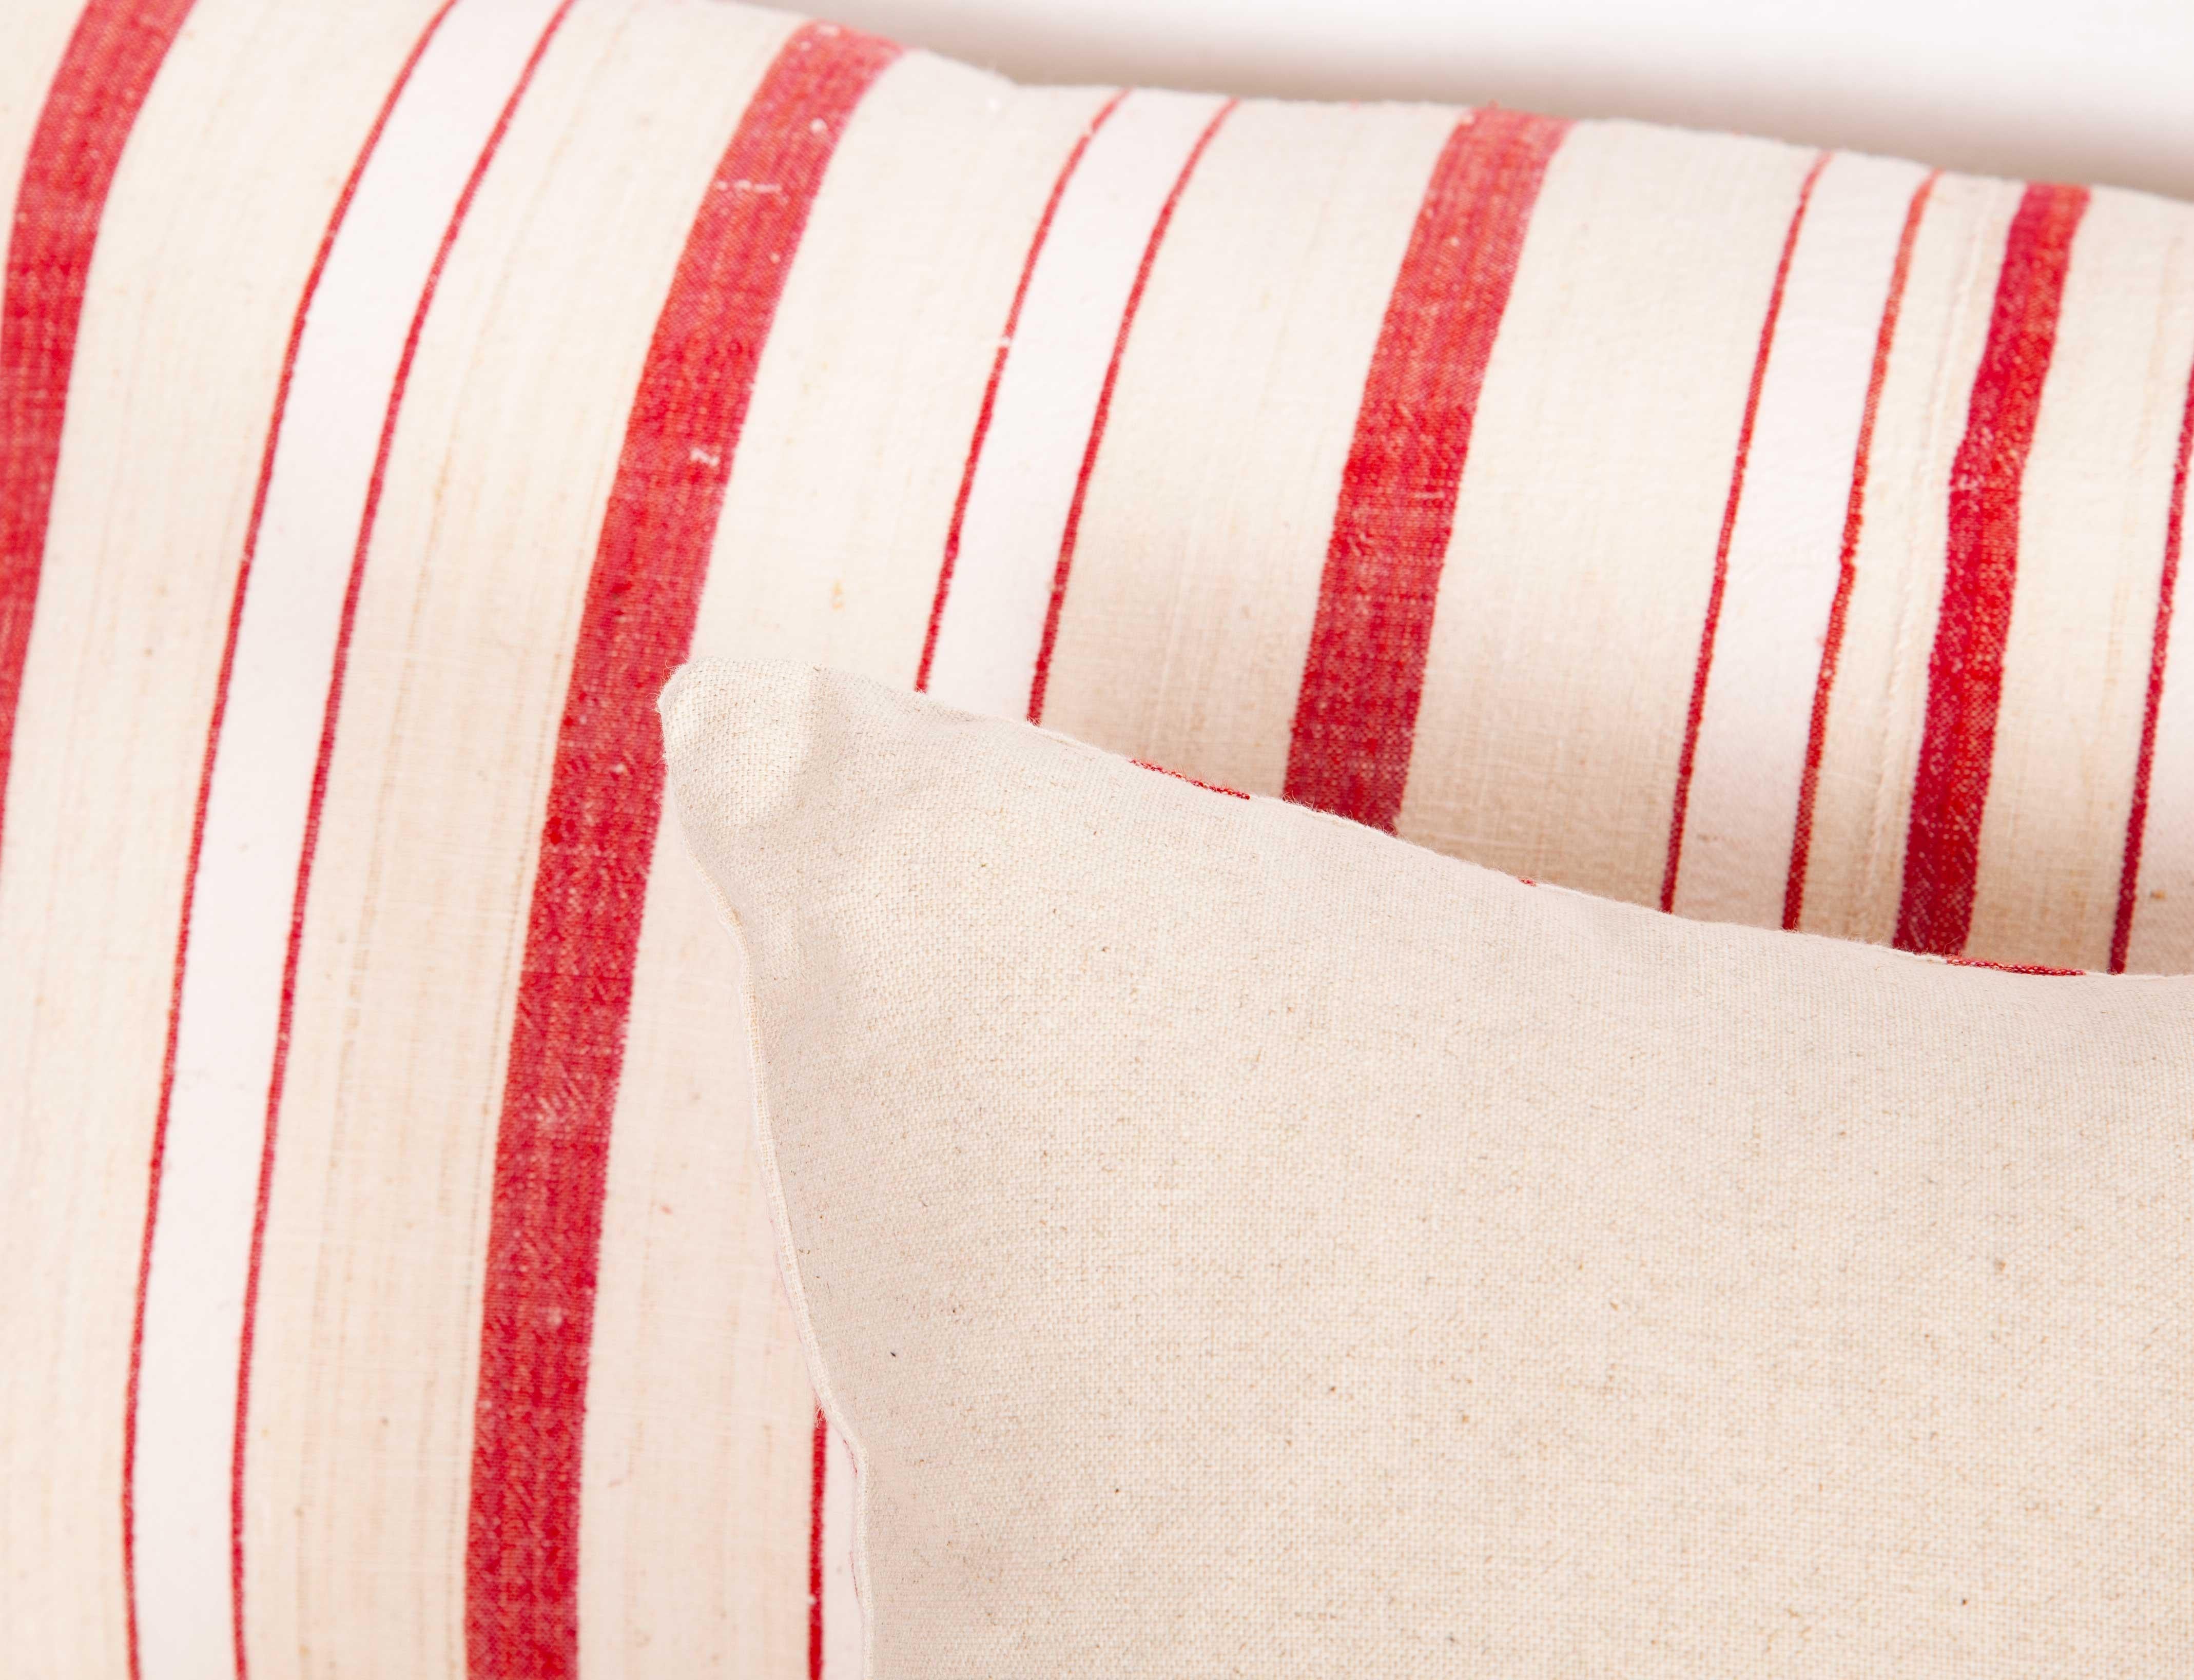 20th Century Linen and Cotton Pillow Cases Made from a Vintage Anatolian Handwoven Textile